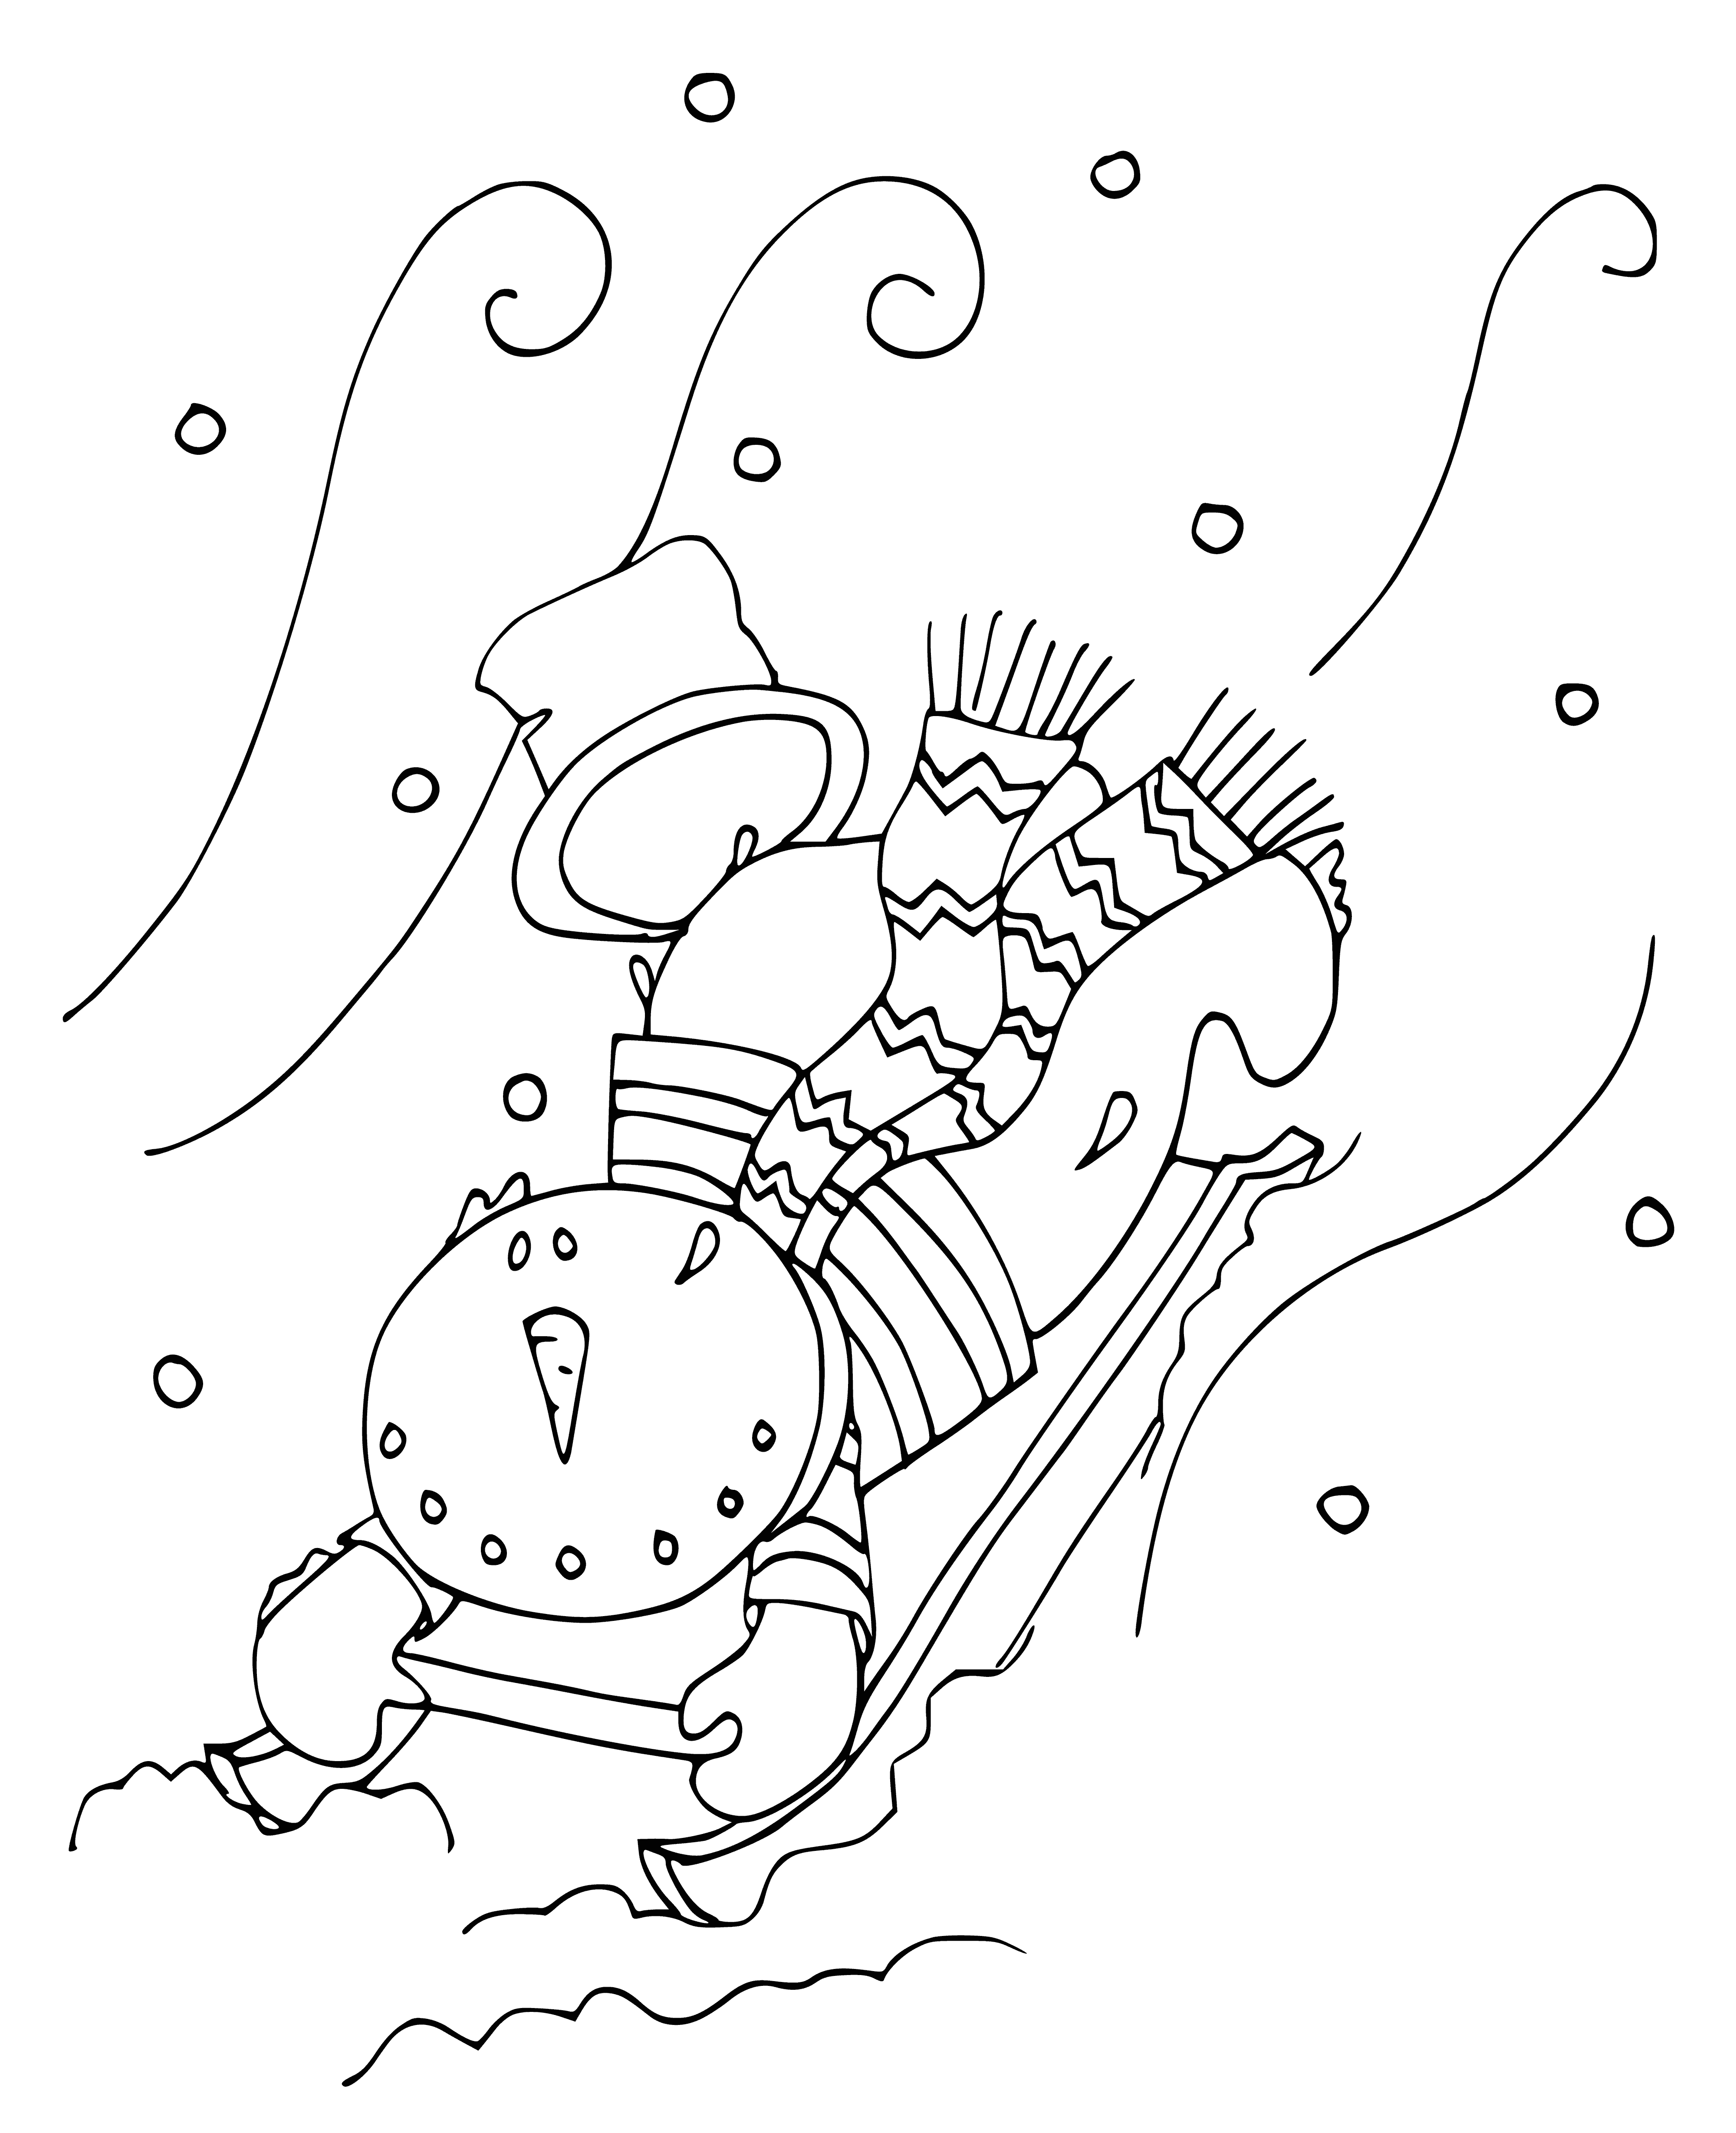 coloring page: He is laughing and having a great time.

The snowman is rolling down the slide and laughing with joy. #WinterFun